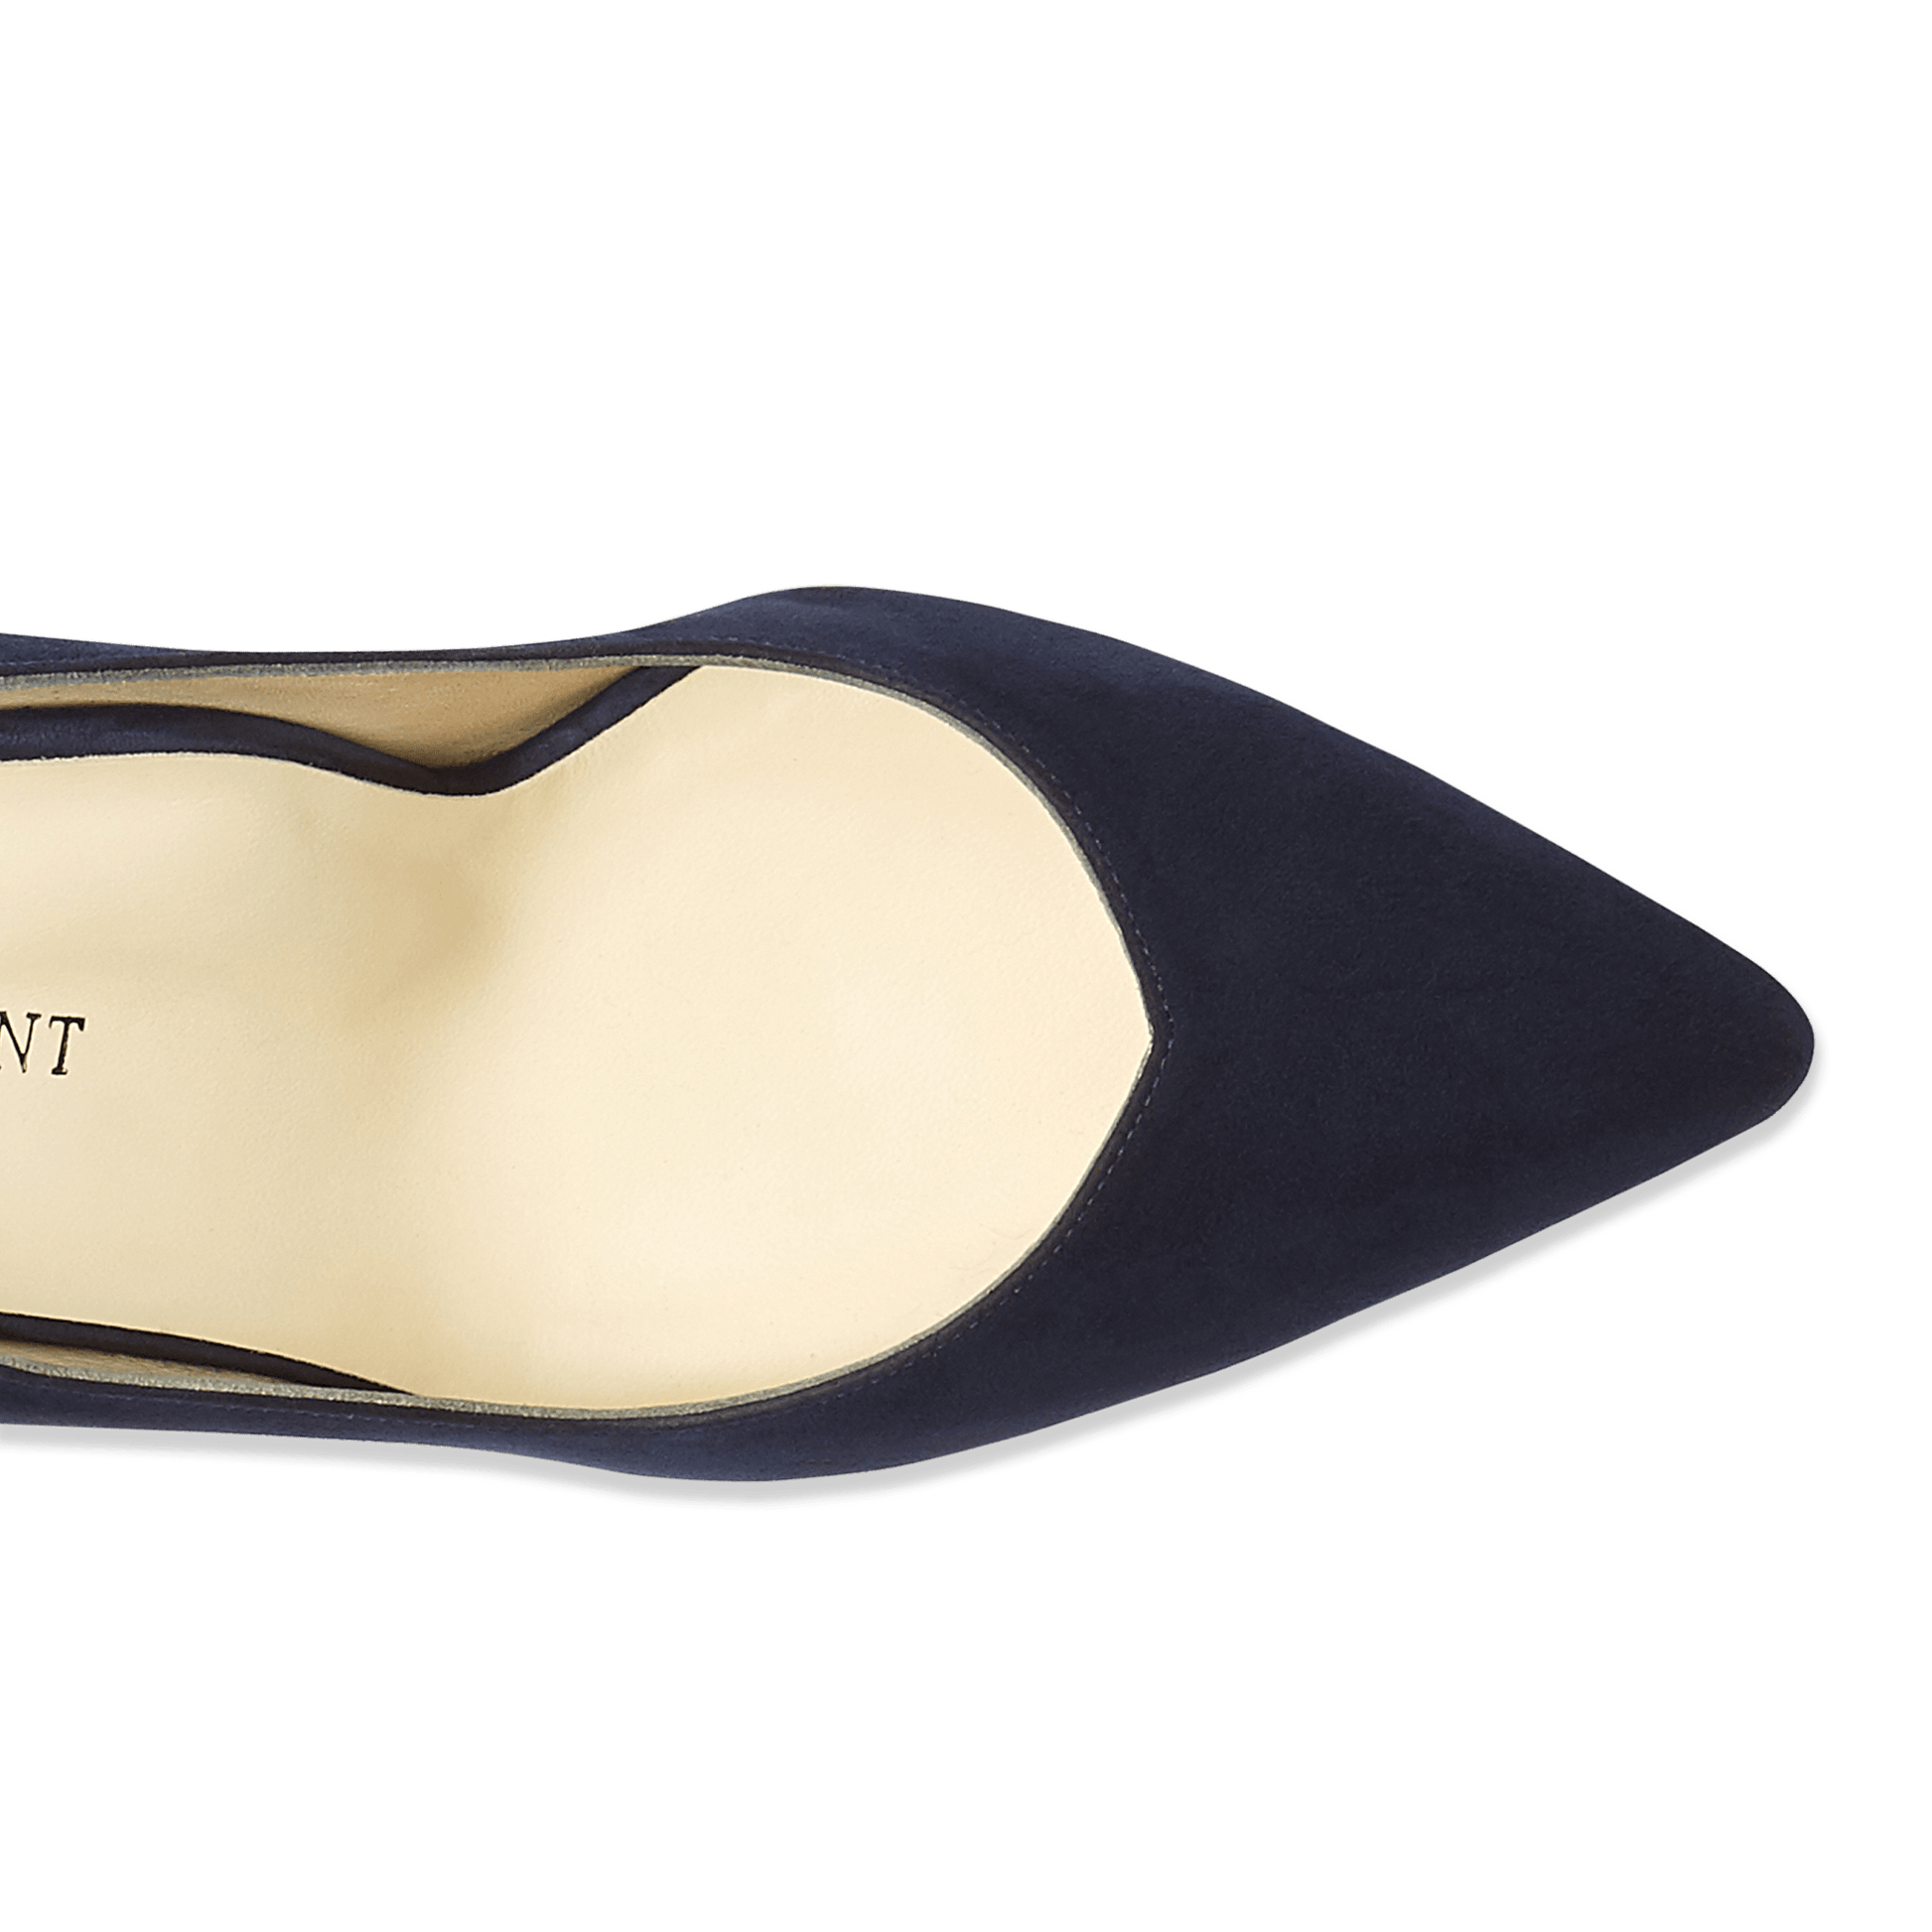 50mm Italian Made Perfect Pointed Toe Pump in Navy Suede